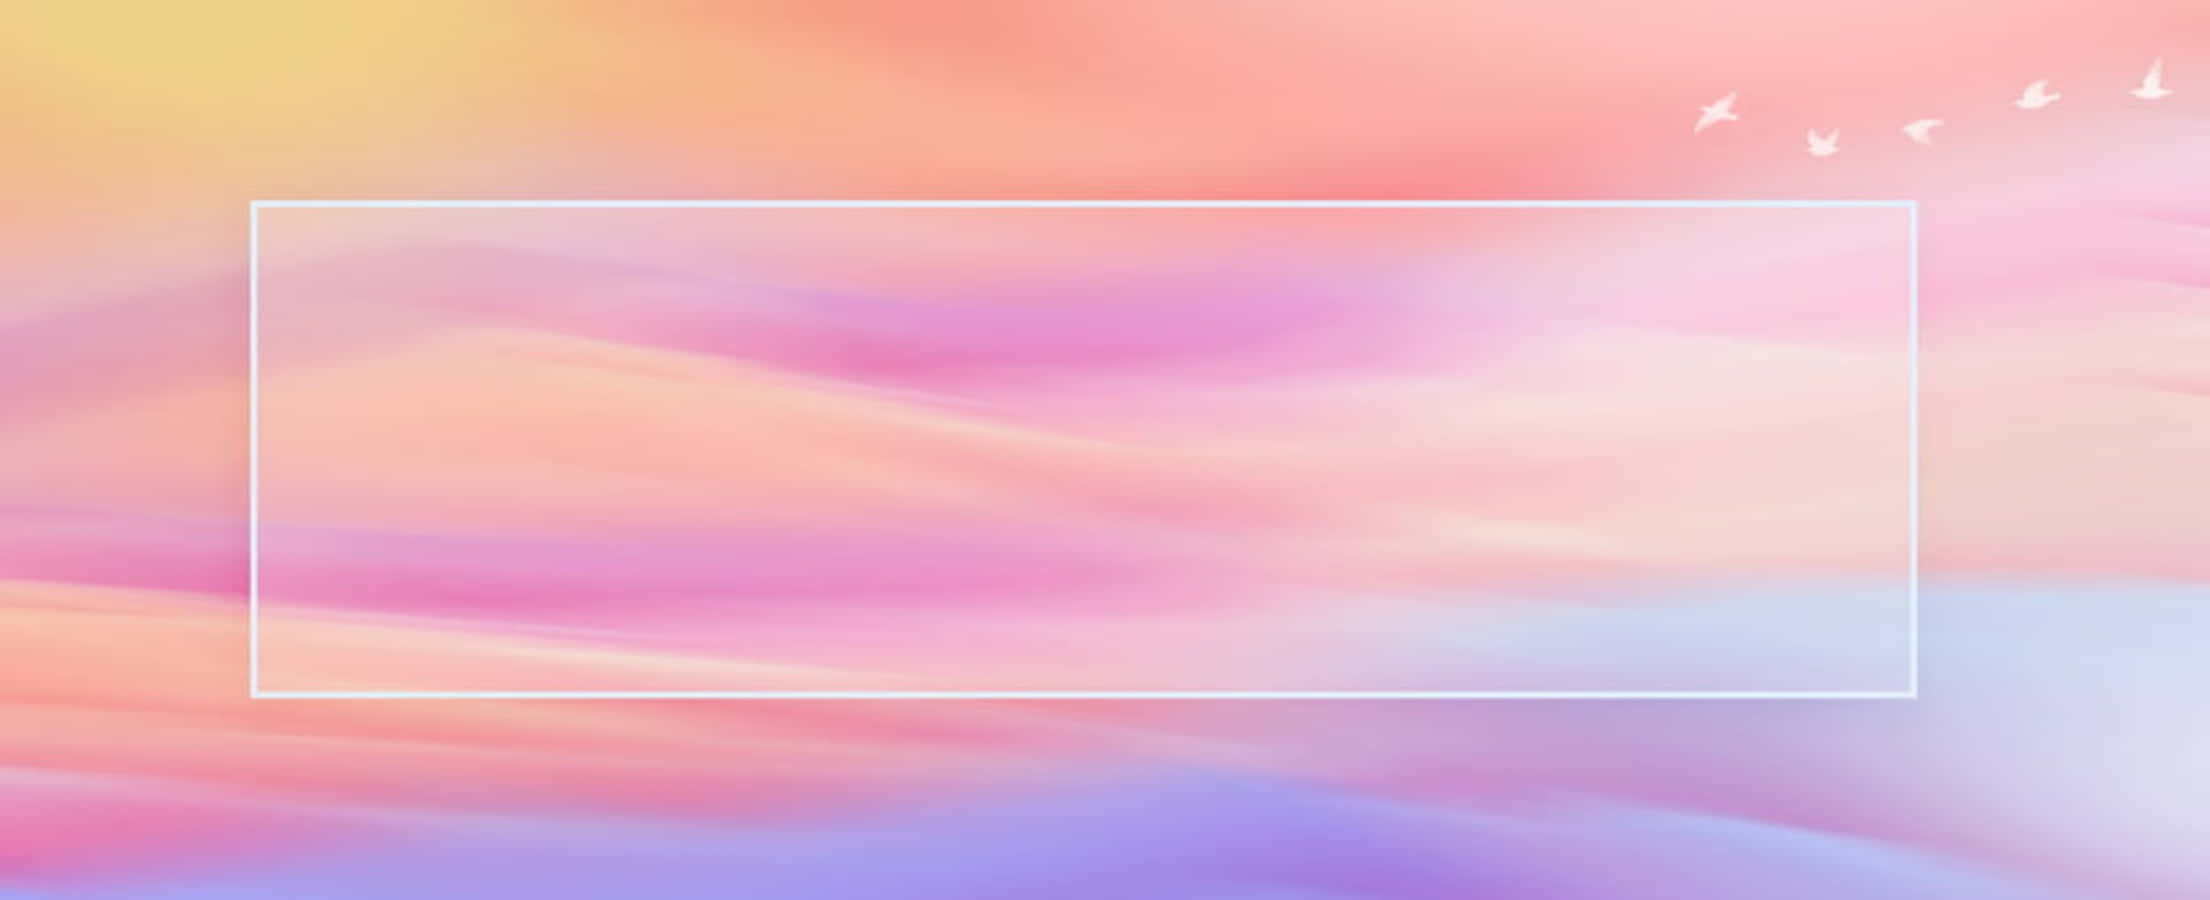 A Pink And Blue Abstract Background With A Square Frame